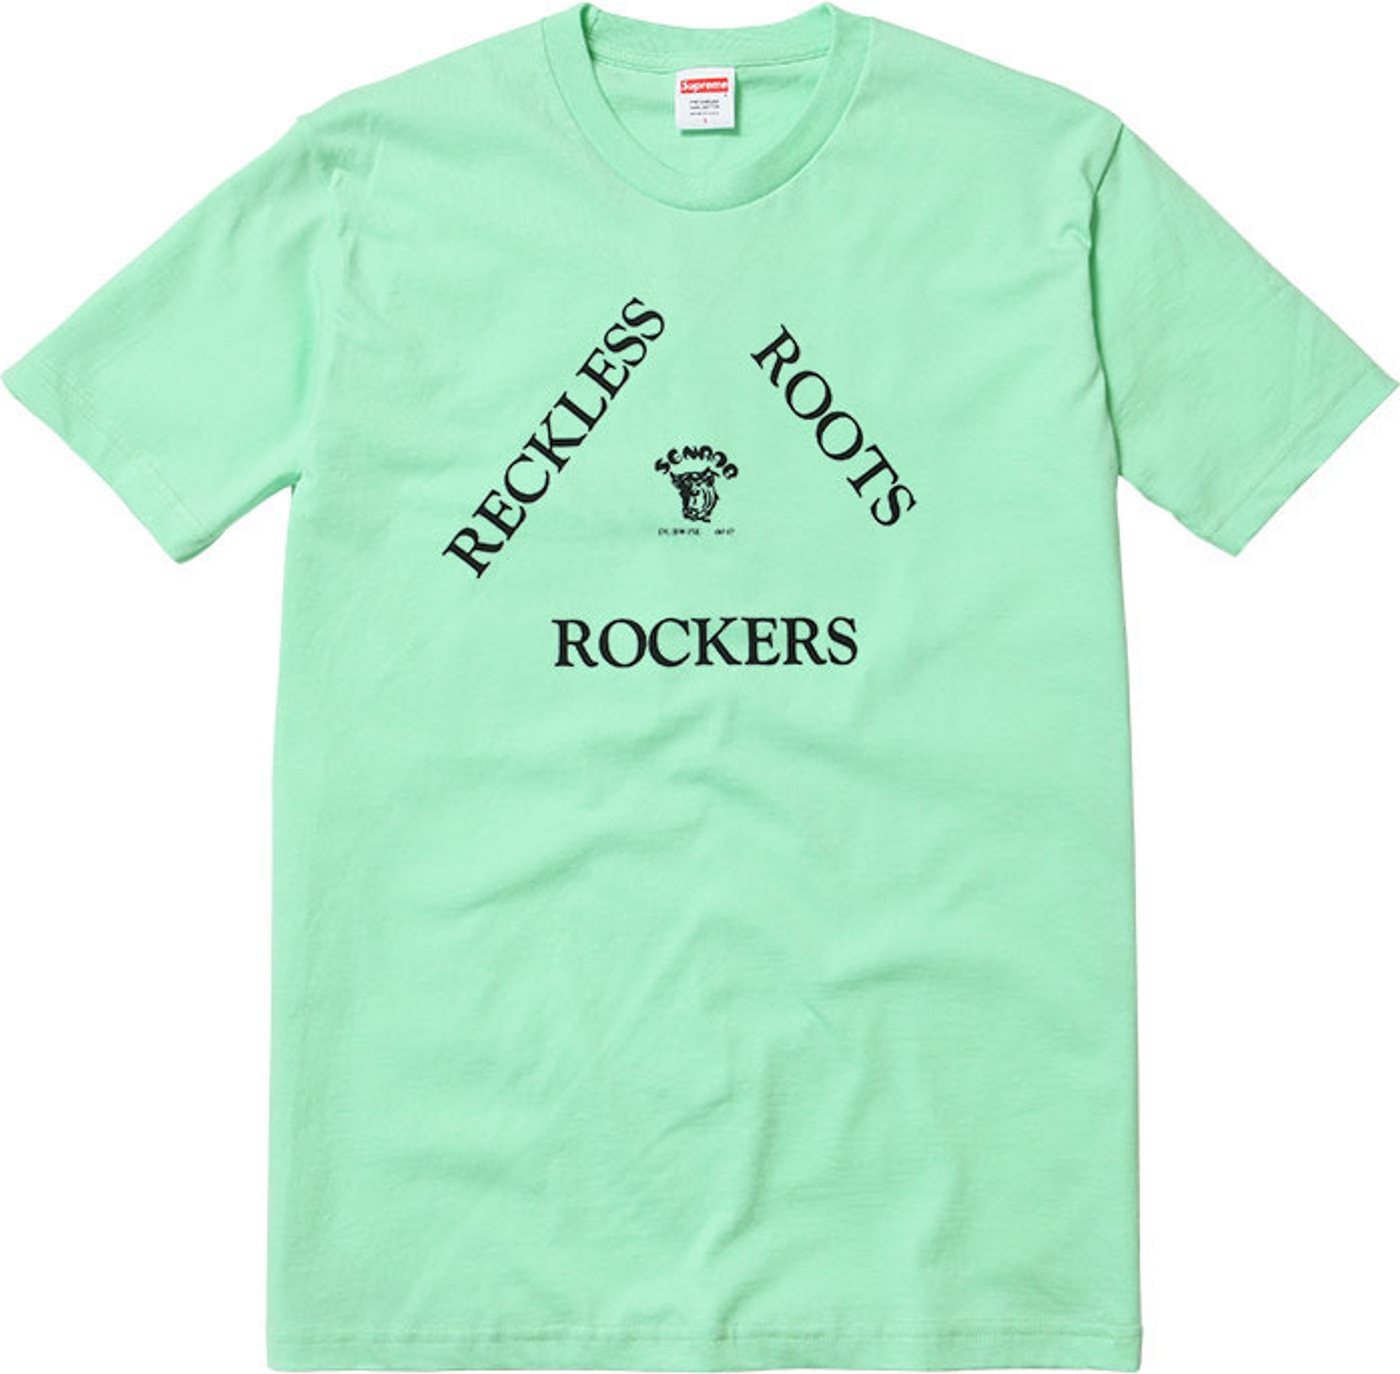 Reckless Tee (7/14)